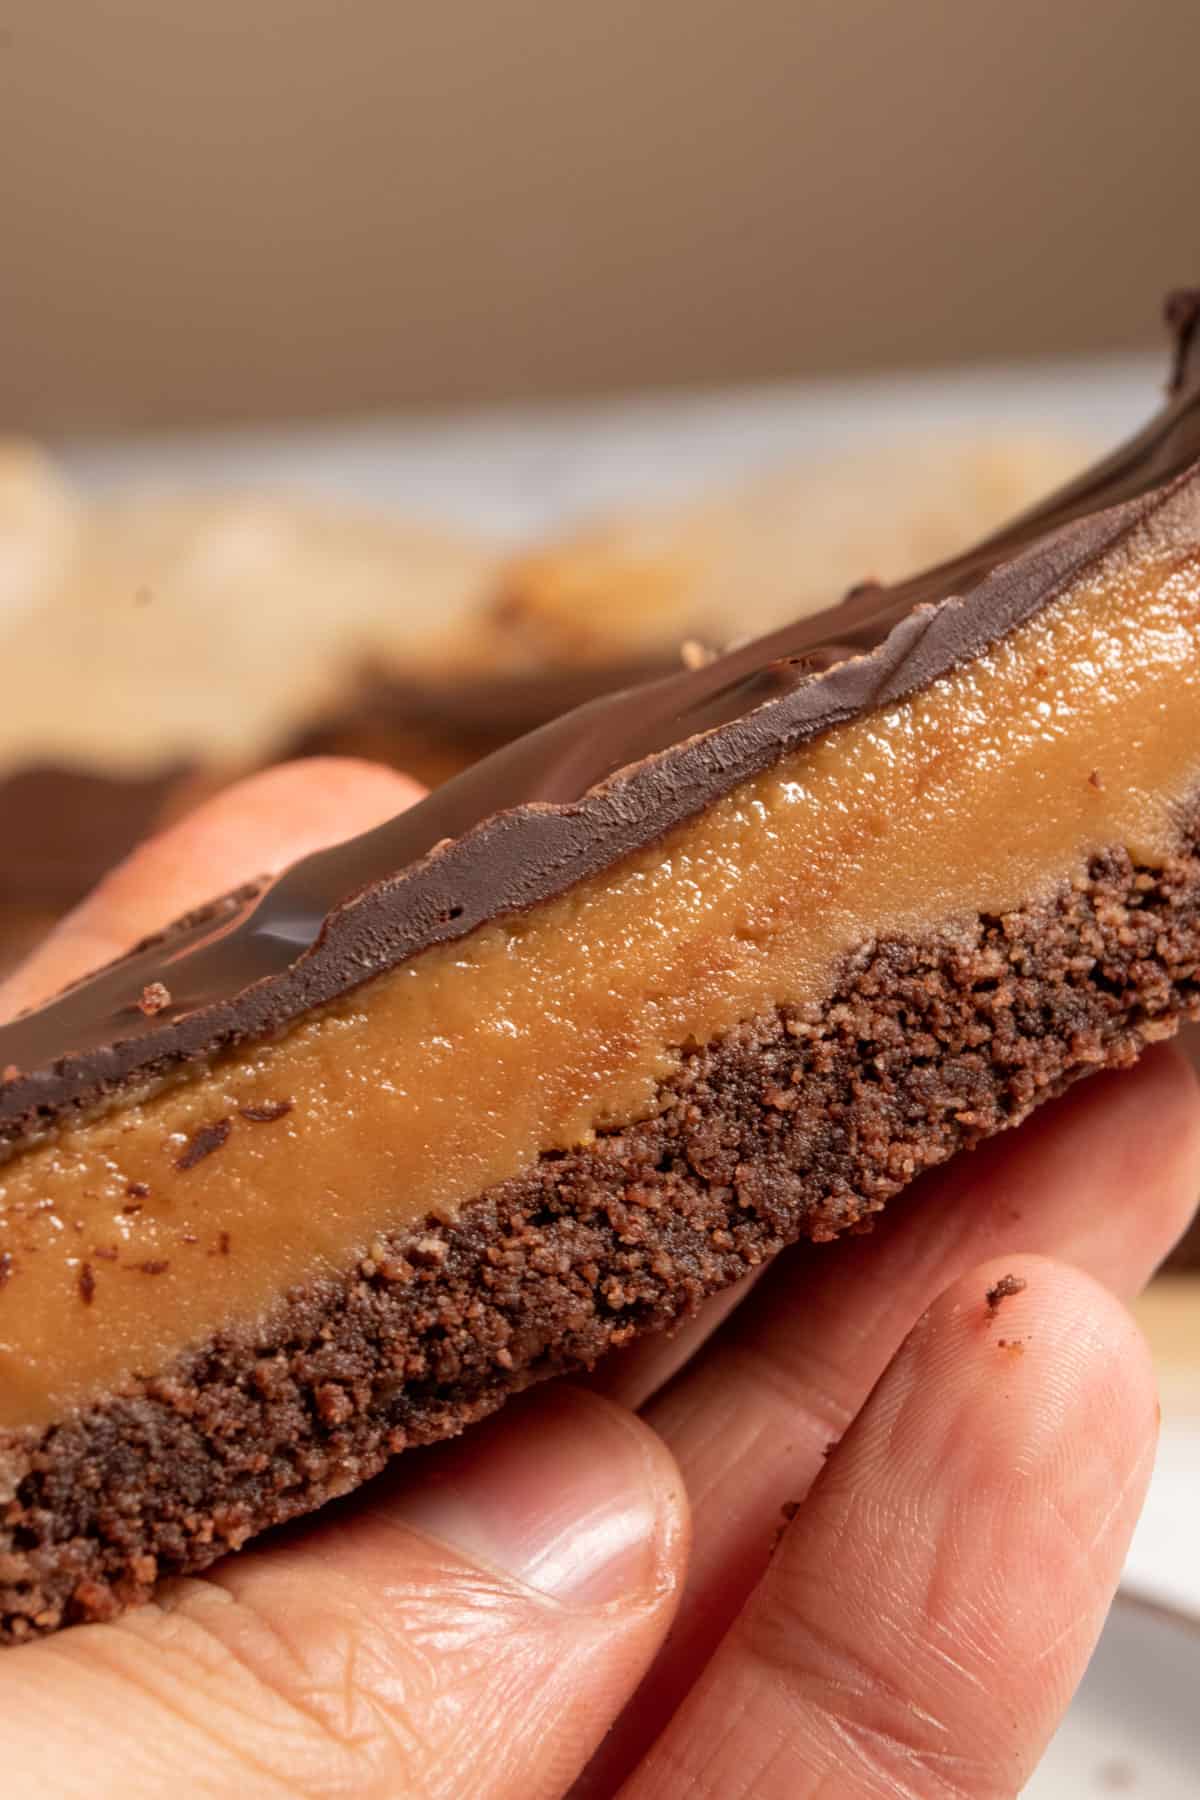 One of my vegan chocolate peanut butter bars being held by a hand. The peanut butter looks gooey in the center of the bar.